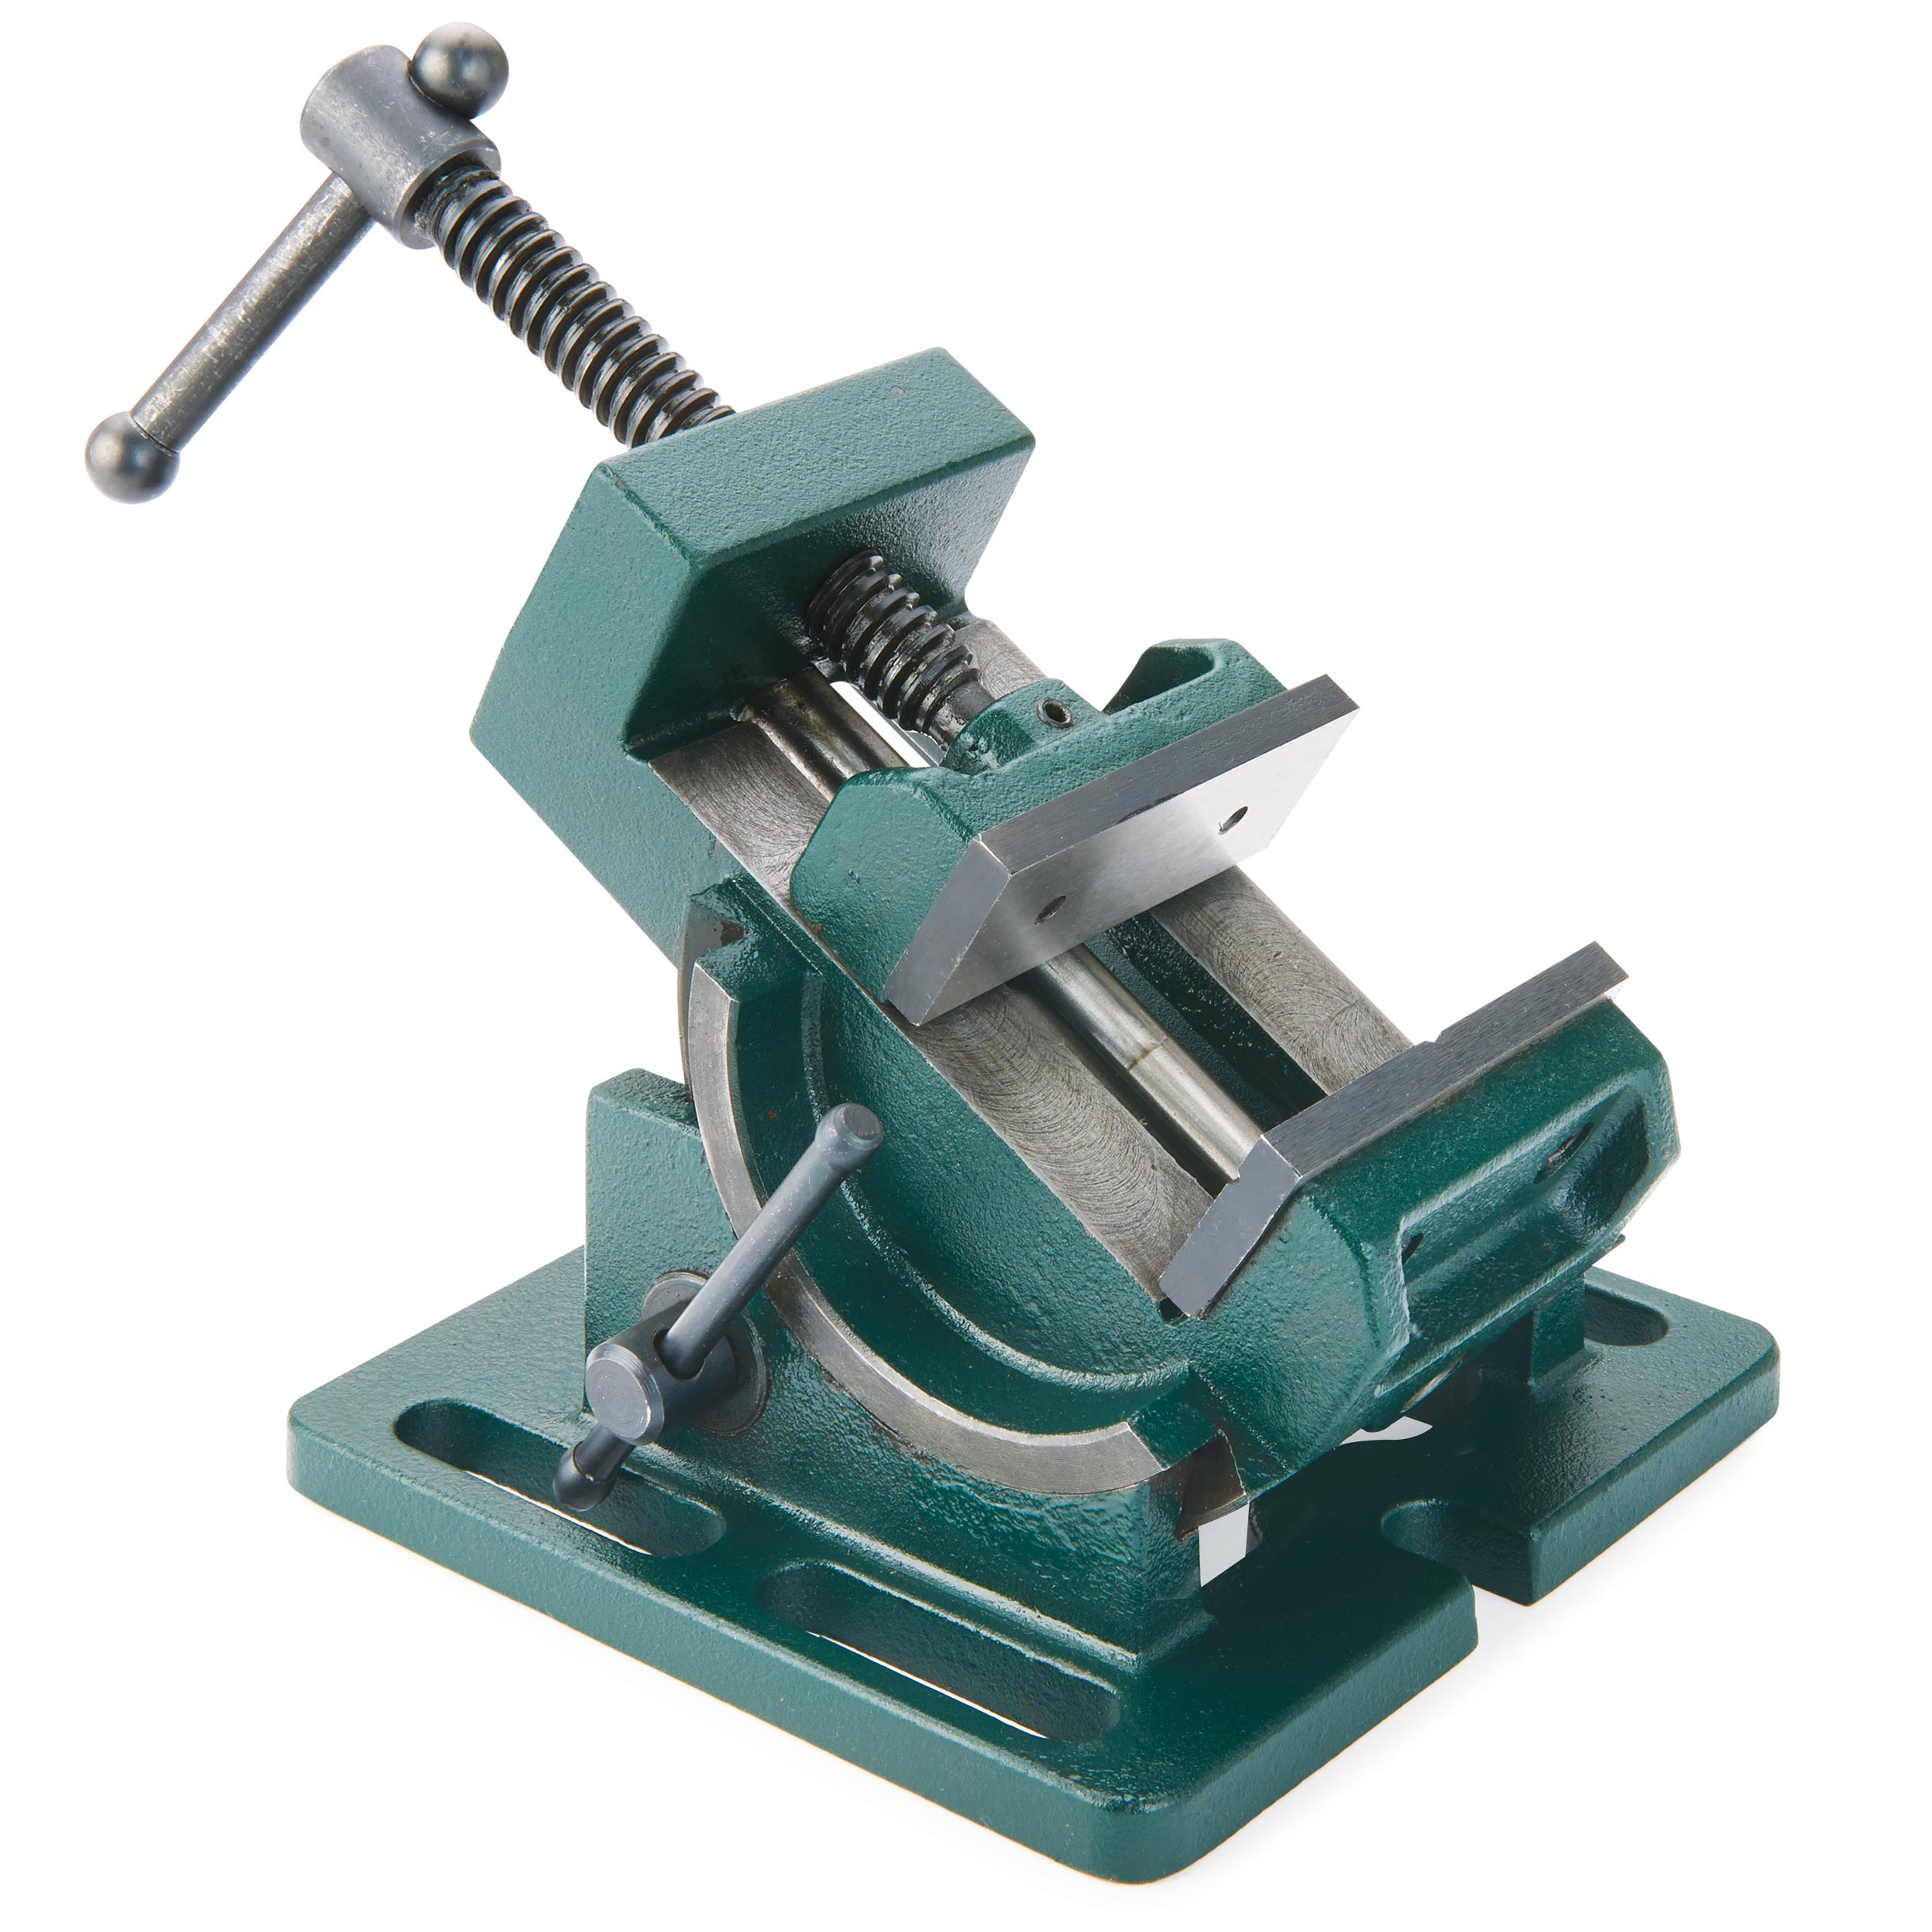 Vise With Angle Adjustment